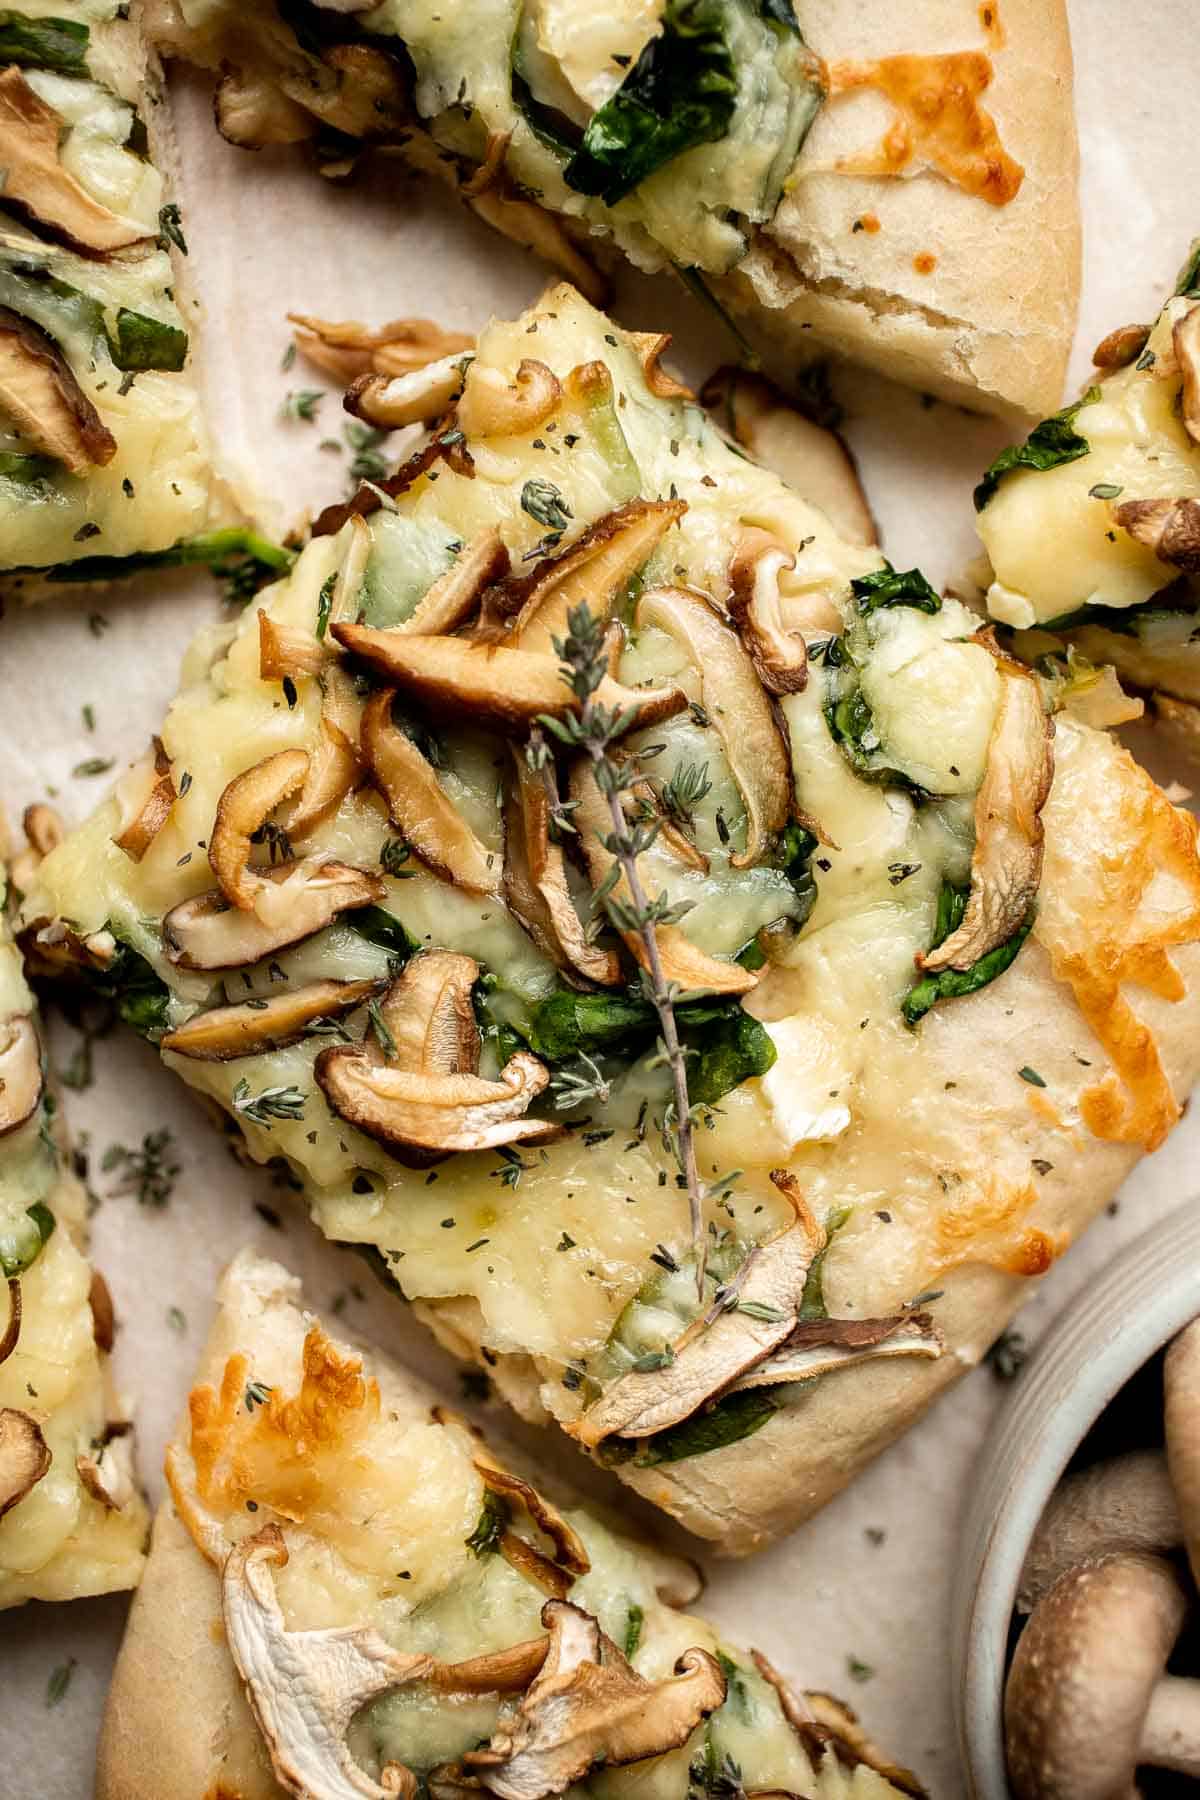 Mushroom Flatbread with Spinach made with homemade pizza dough, truffle Italian cheeses, and shiitake mushrooms, makes a perfect appetizer or simple dinner. | aheadofthyme.com